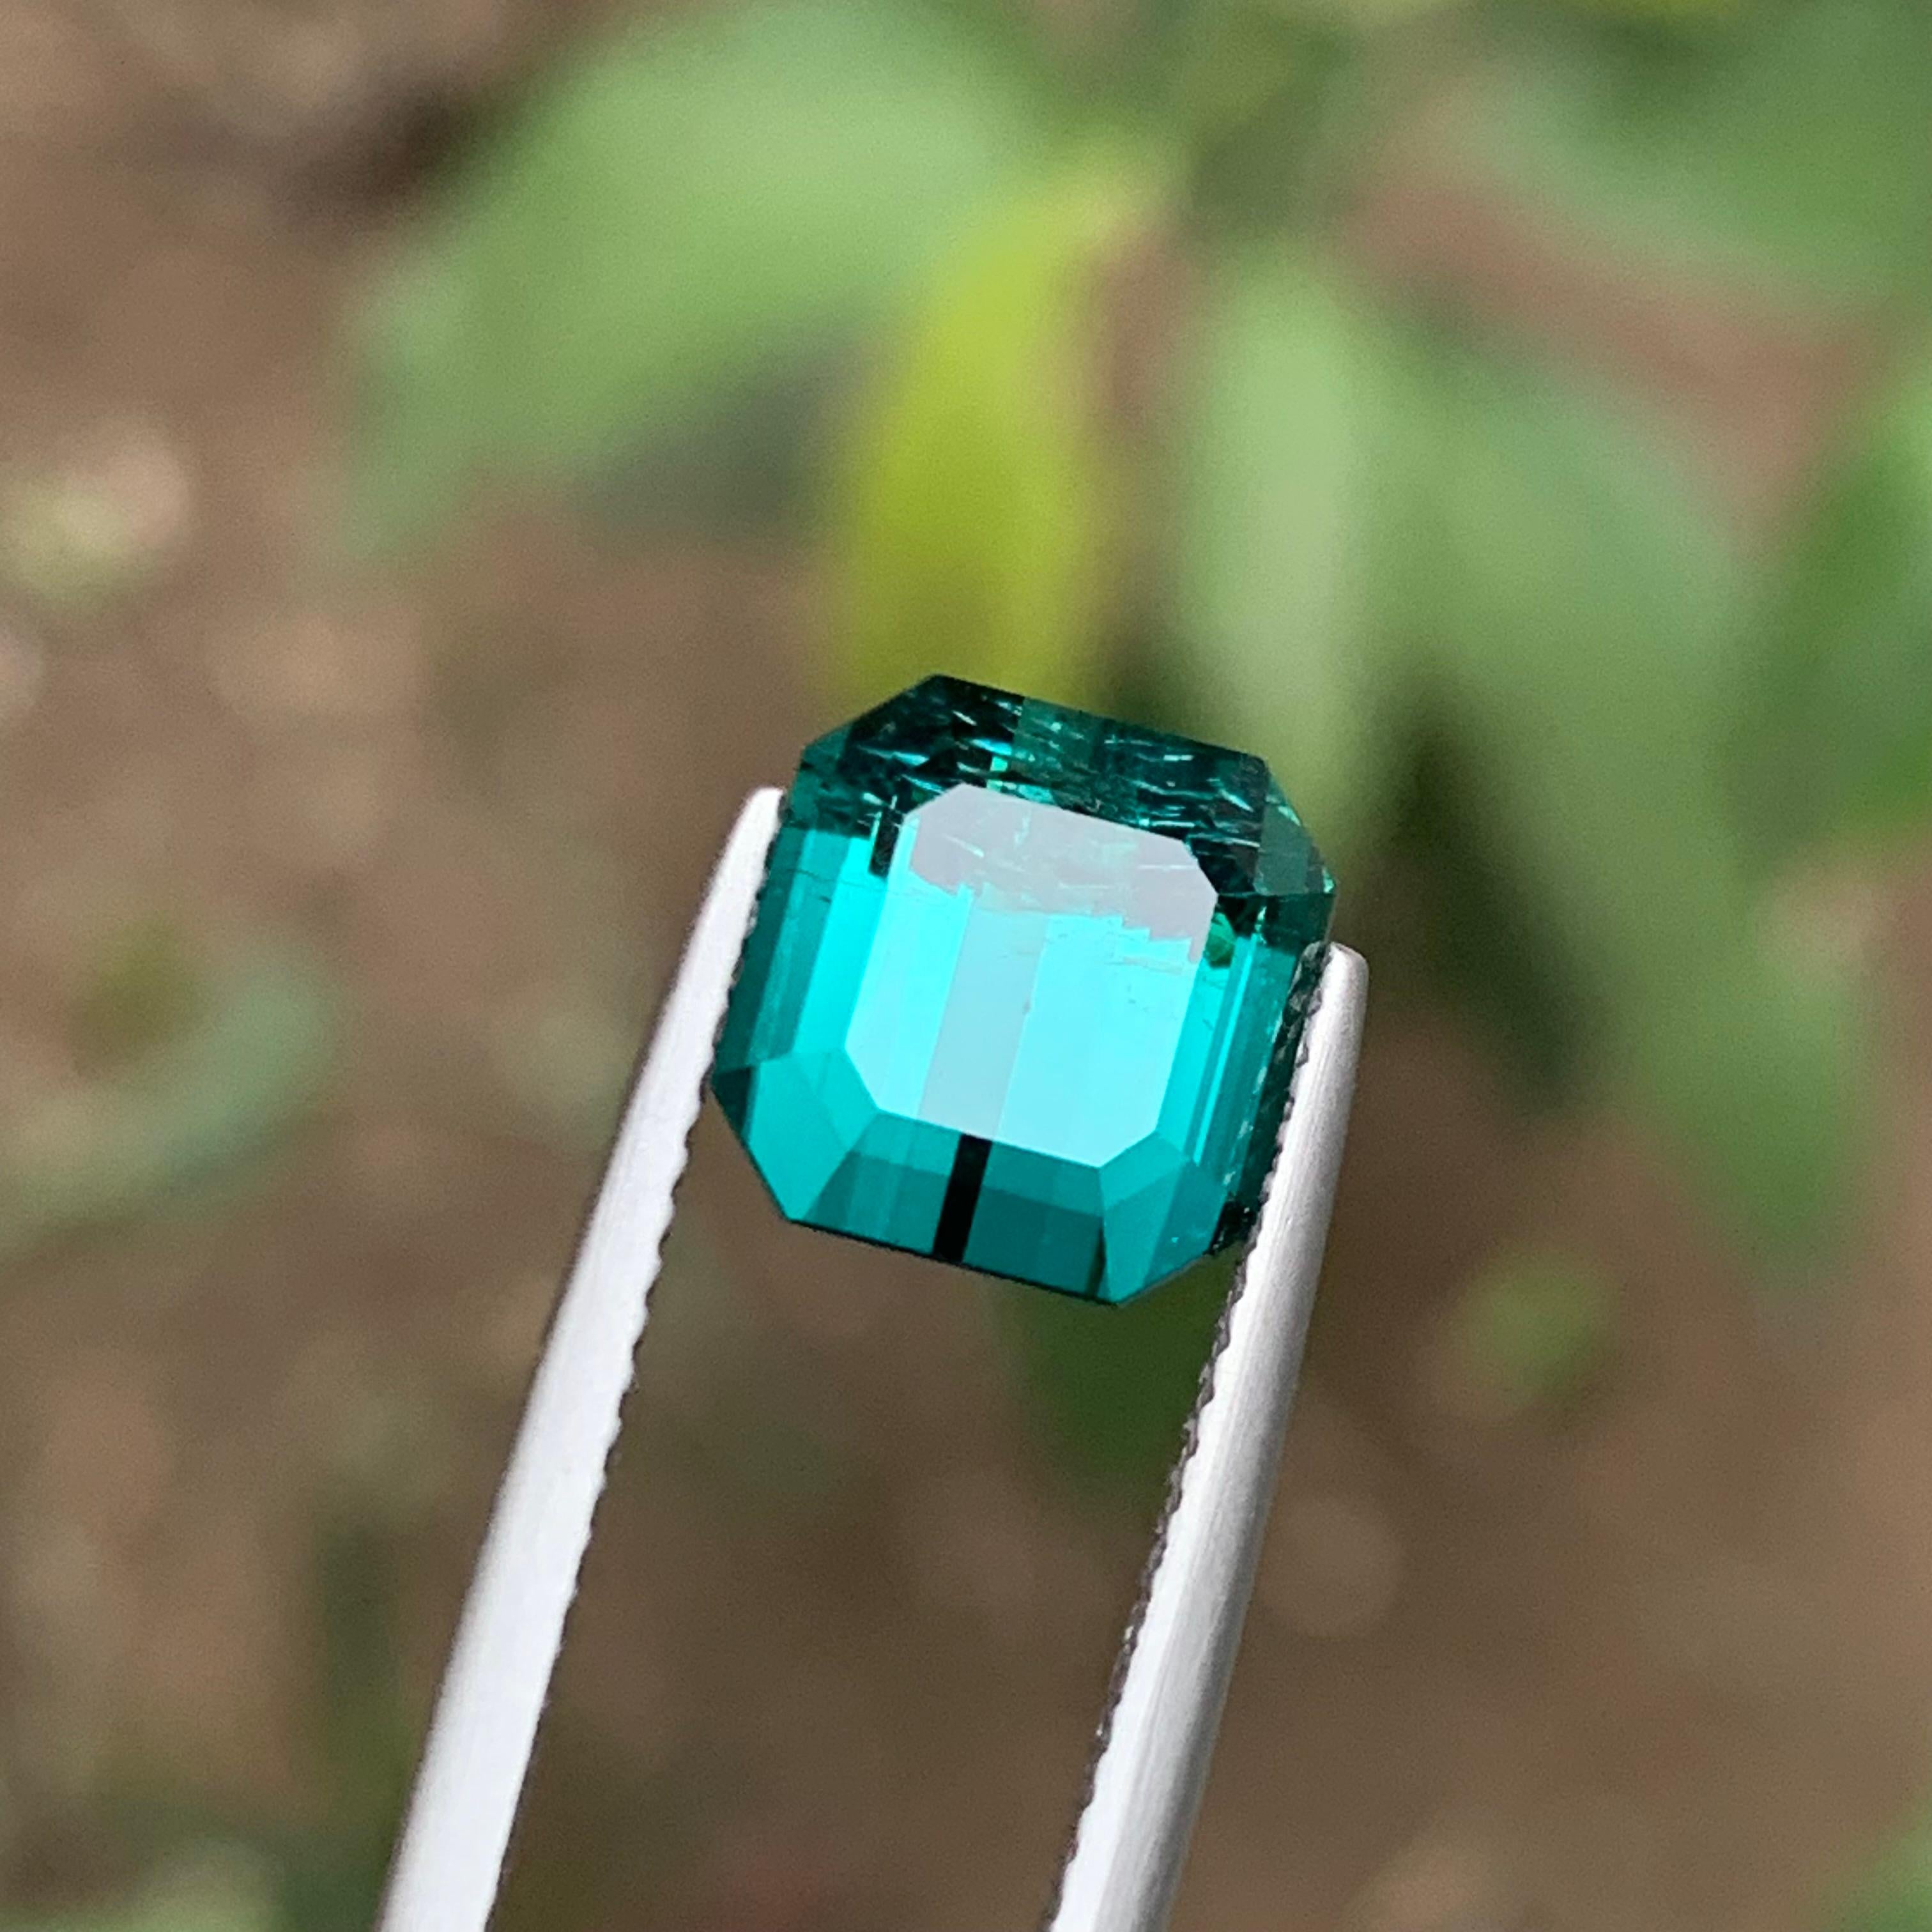 GEMSTONE TYPE: Tourmaline
PIECE(S): 1
WEIGHT: 4.20 Carat
SHAPE: Emerald
SIZE (MM): 9.08 x 8.85 x 6.04
COLOR: Vibrant Lagoon Greenish Blue
CLARITY: Slightly Included 
TREATMENT: None
ORIGIN: Afghanistan
CERTIFICATE: On demand

This captivating